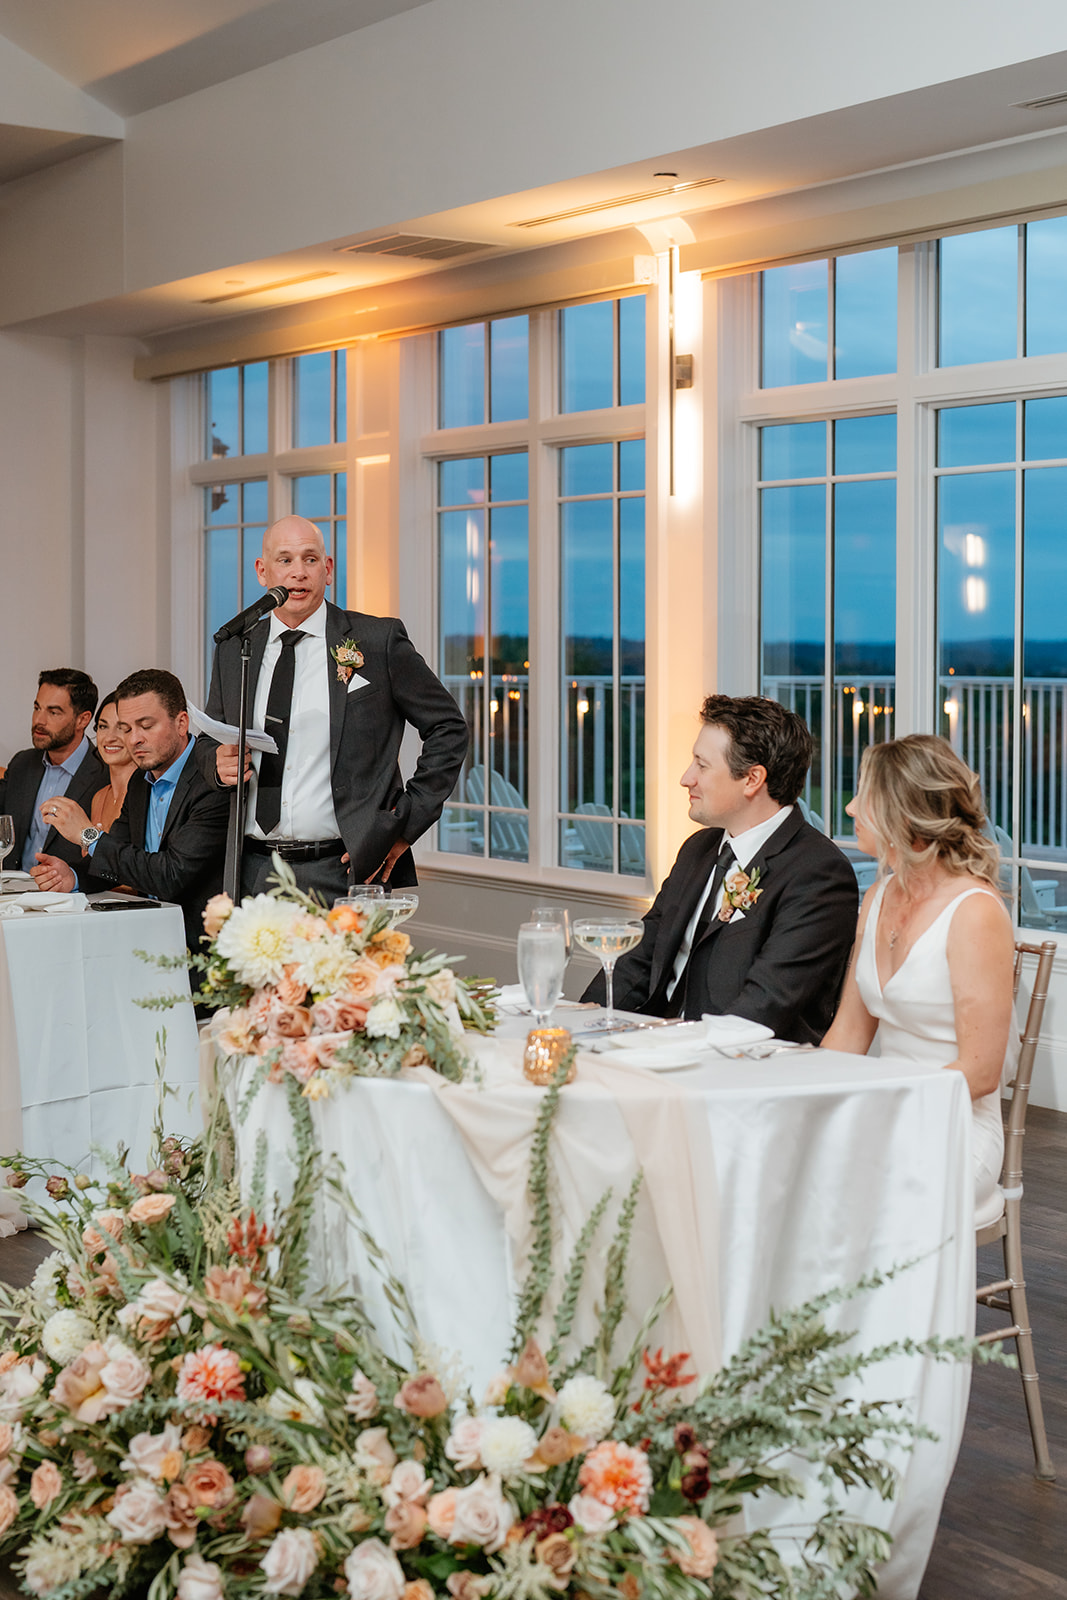 A happy couple at their wedding reception at Granite Links sitting together at a beautifully decorated table.